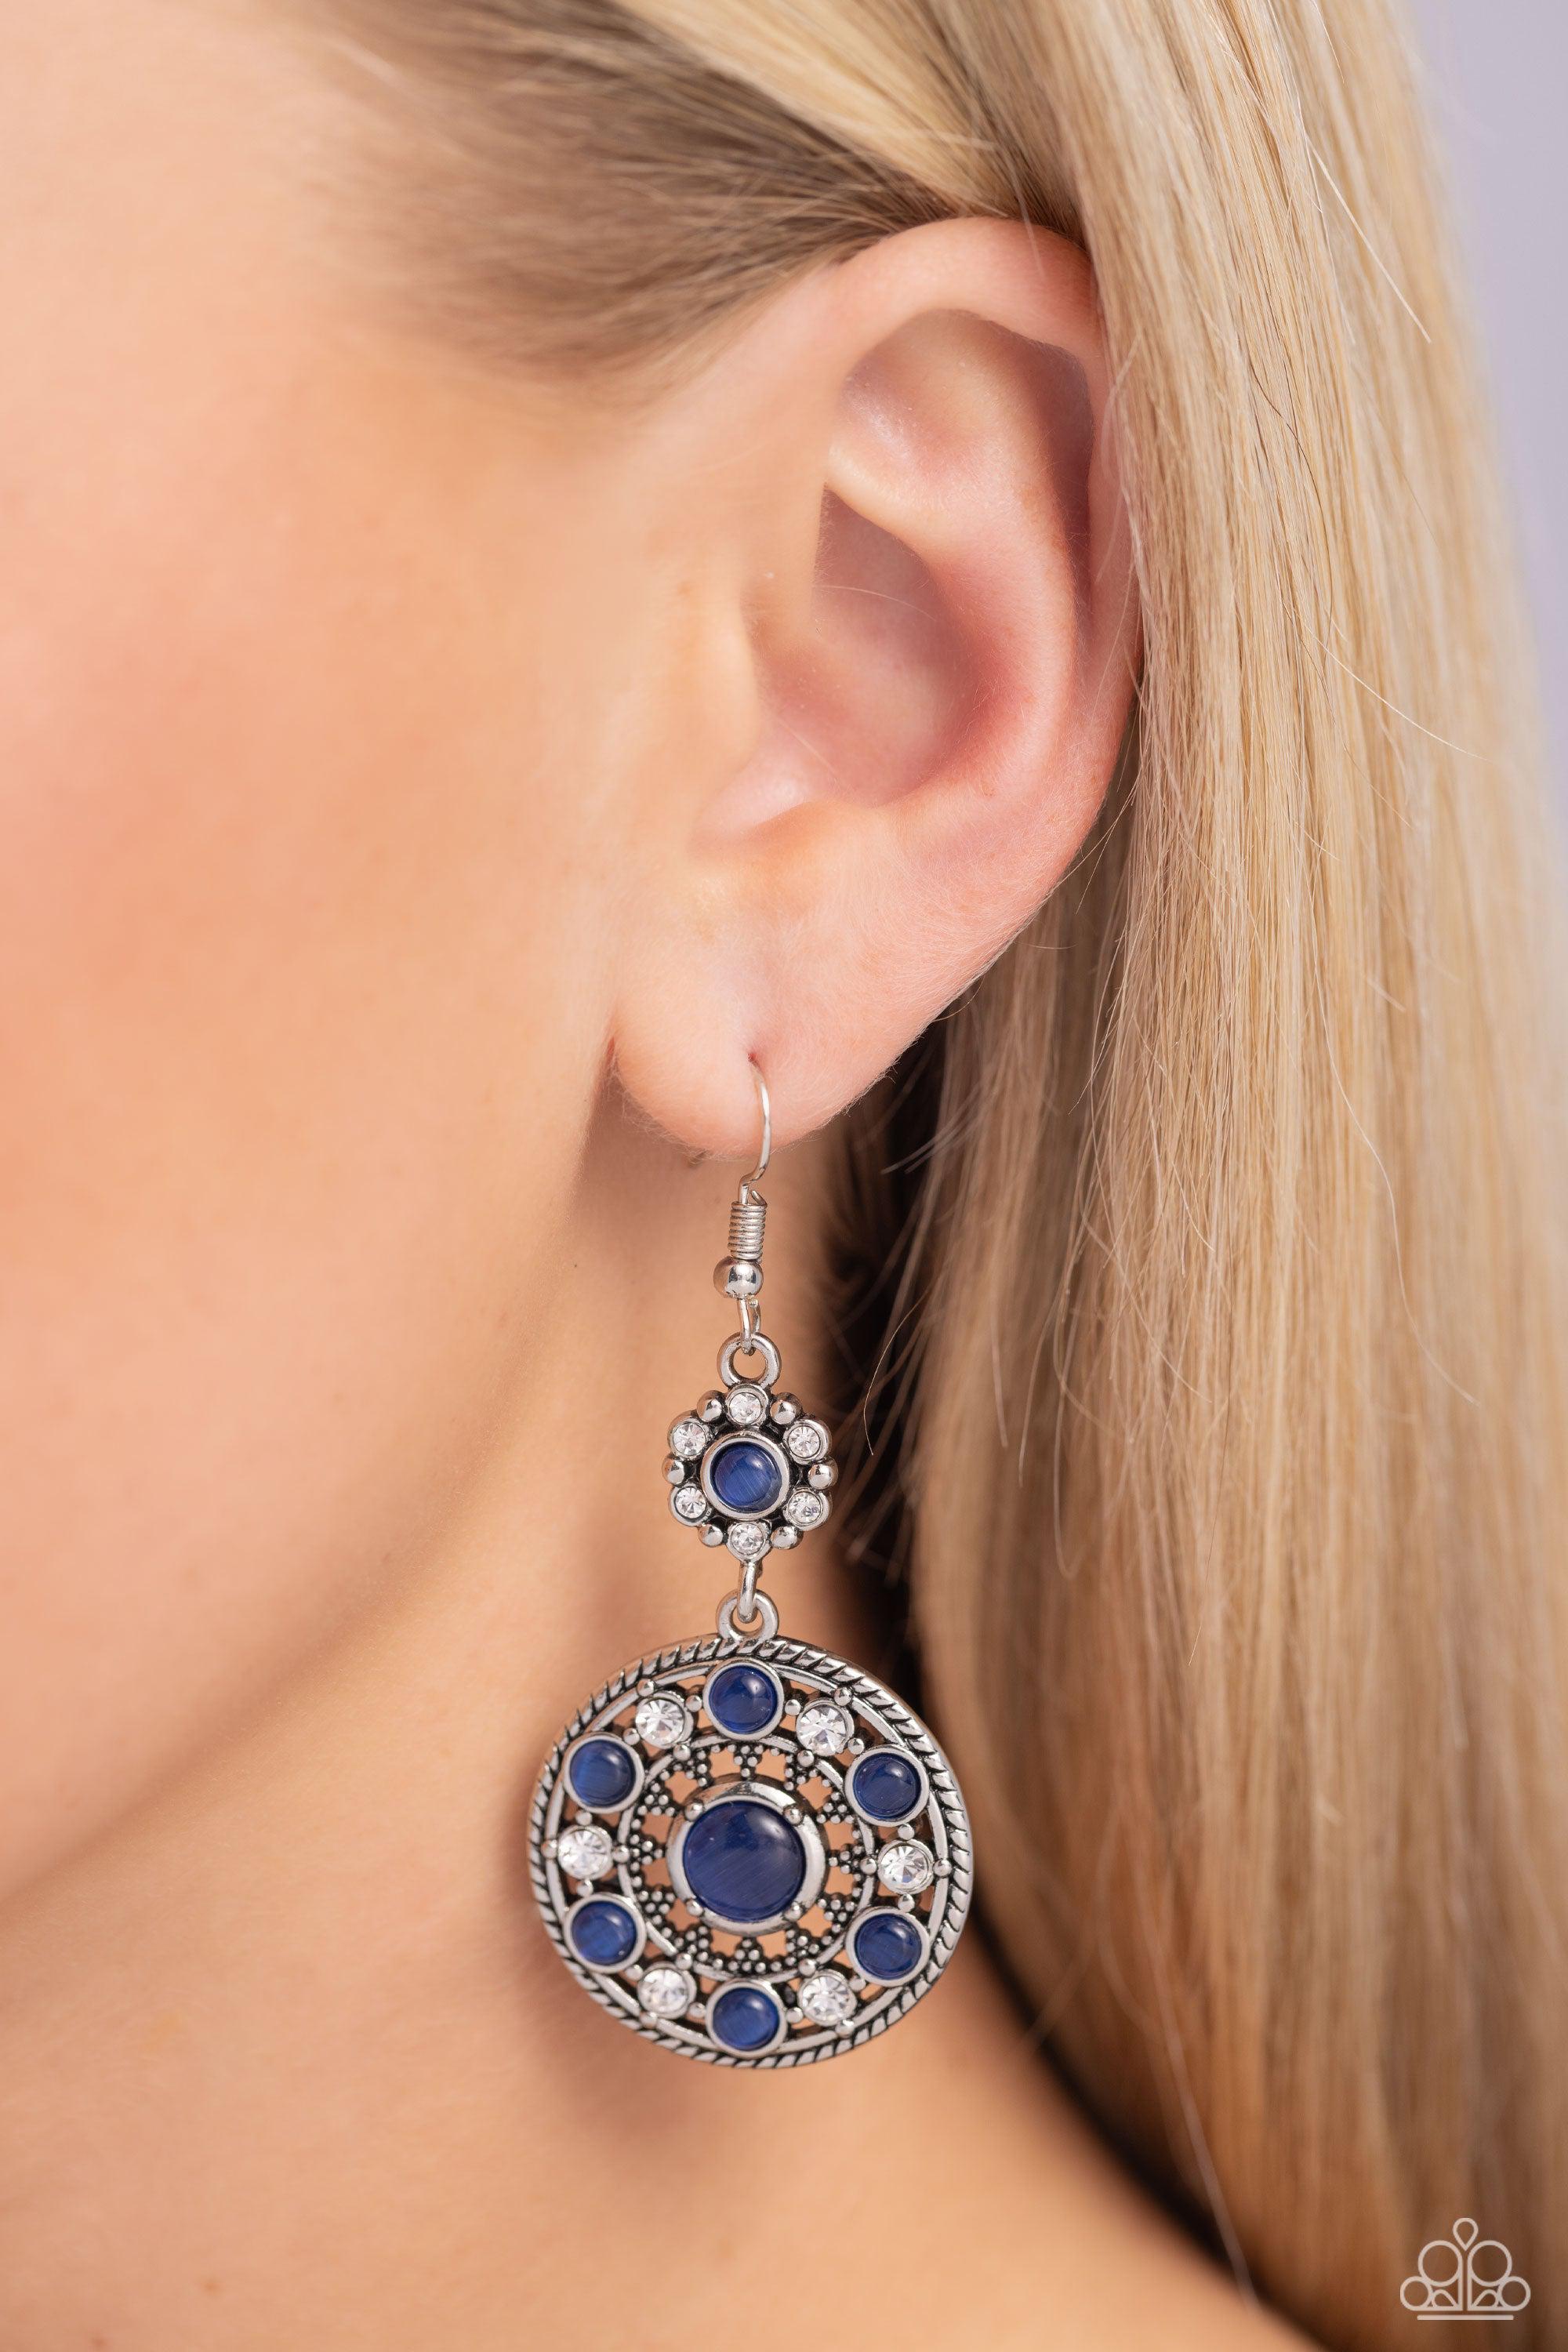 Party at My PALACE Blue Cat's Eye Stone Earrings - Paparazzi Accessories- lightbox - CarasShop.com - $5 Jewelry by Cara Jewels